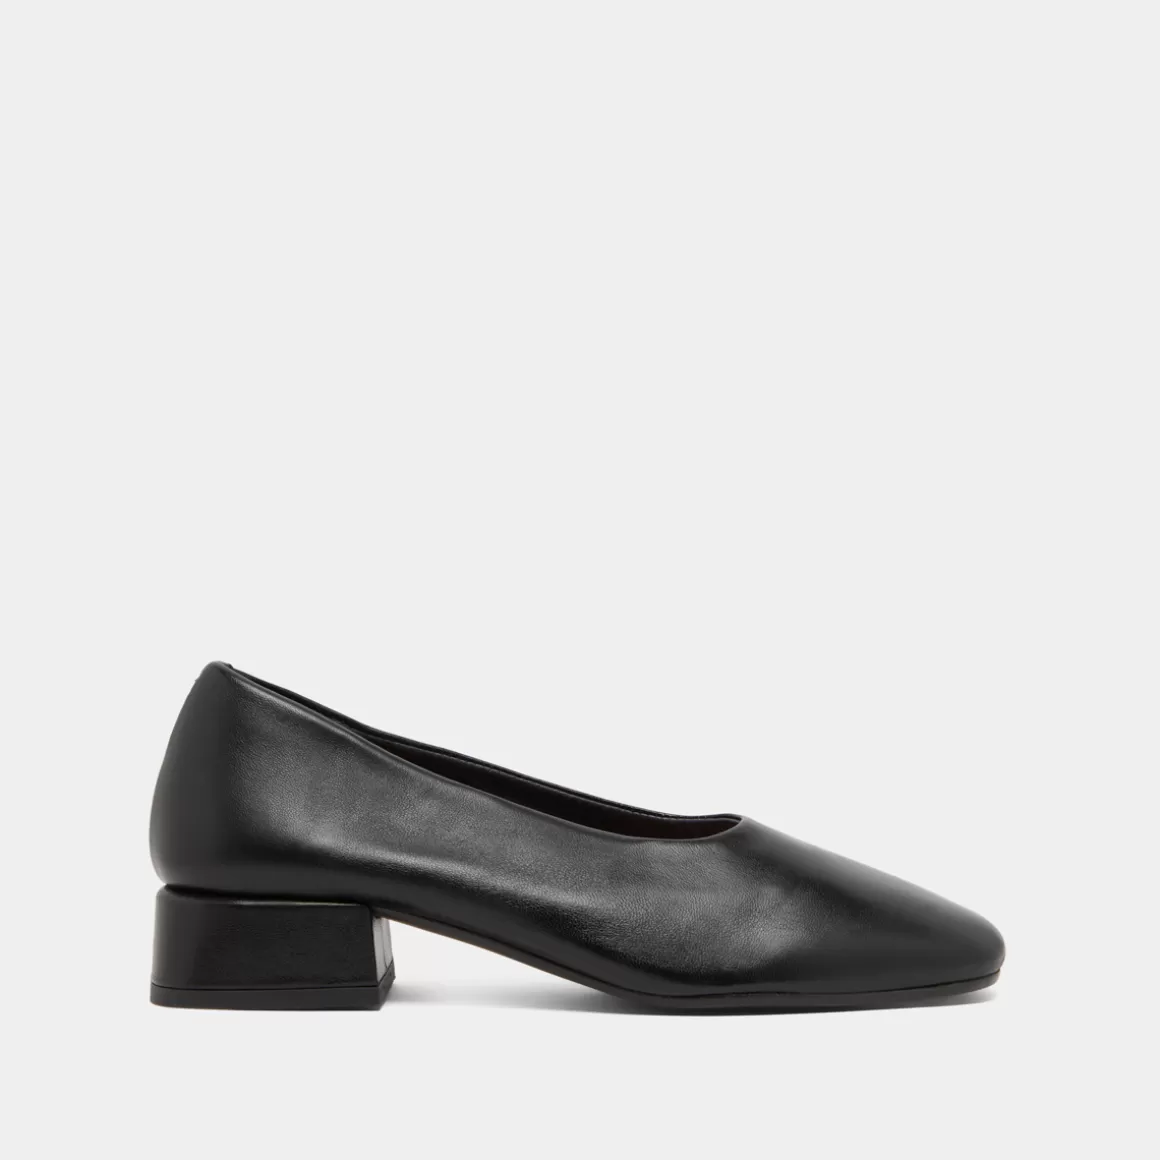 Ballerinas with small heels and rounded tips<Jonak New